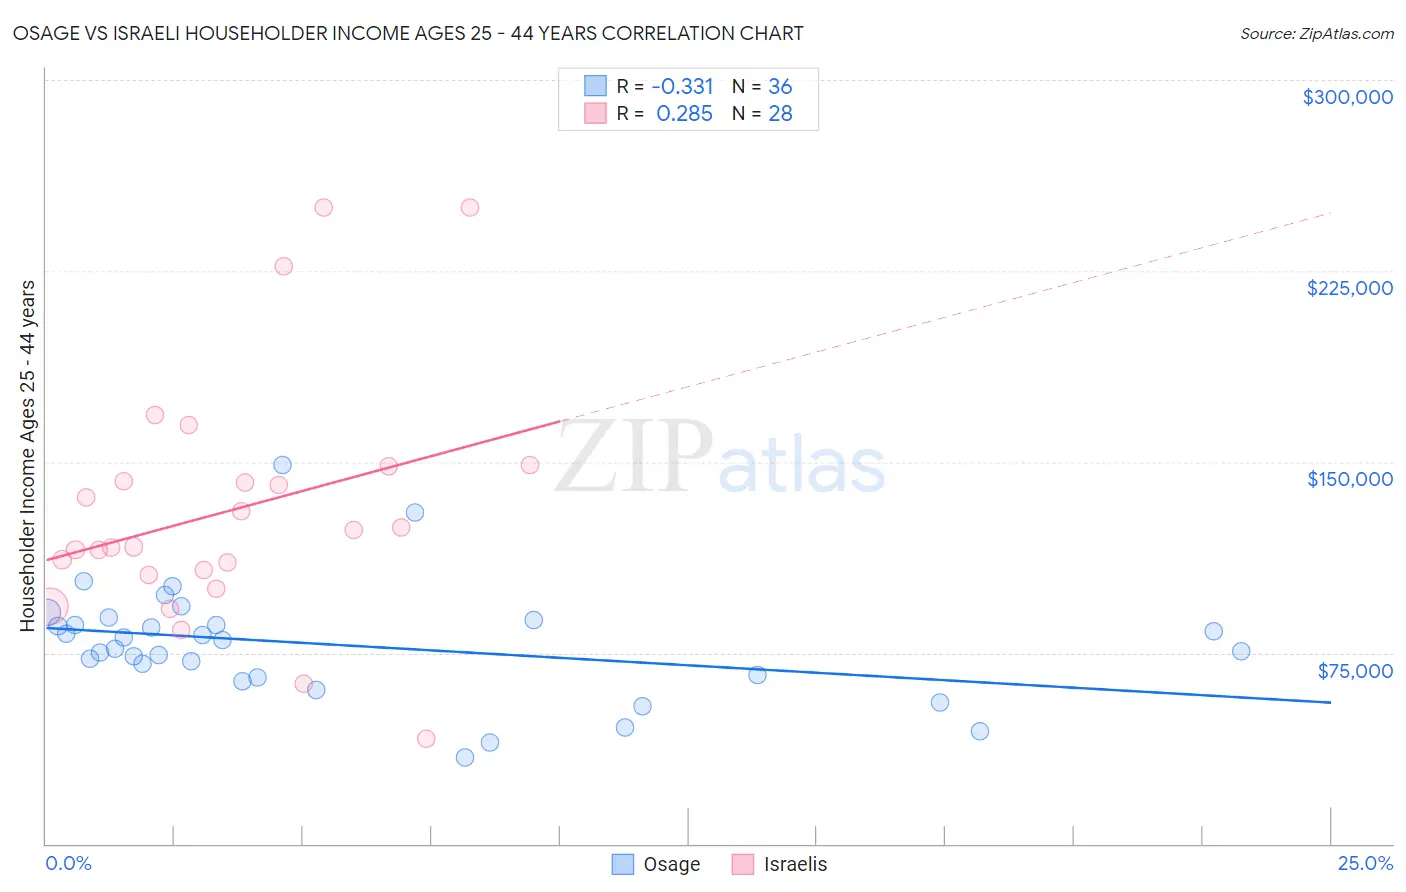 Osage vs Israeli Householder Income Ages 25 - 44 years